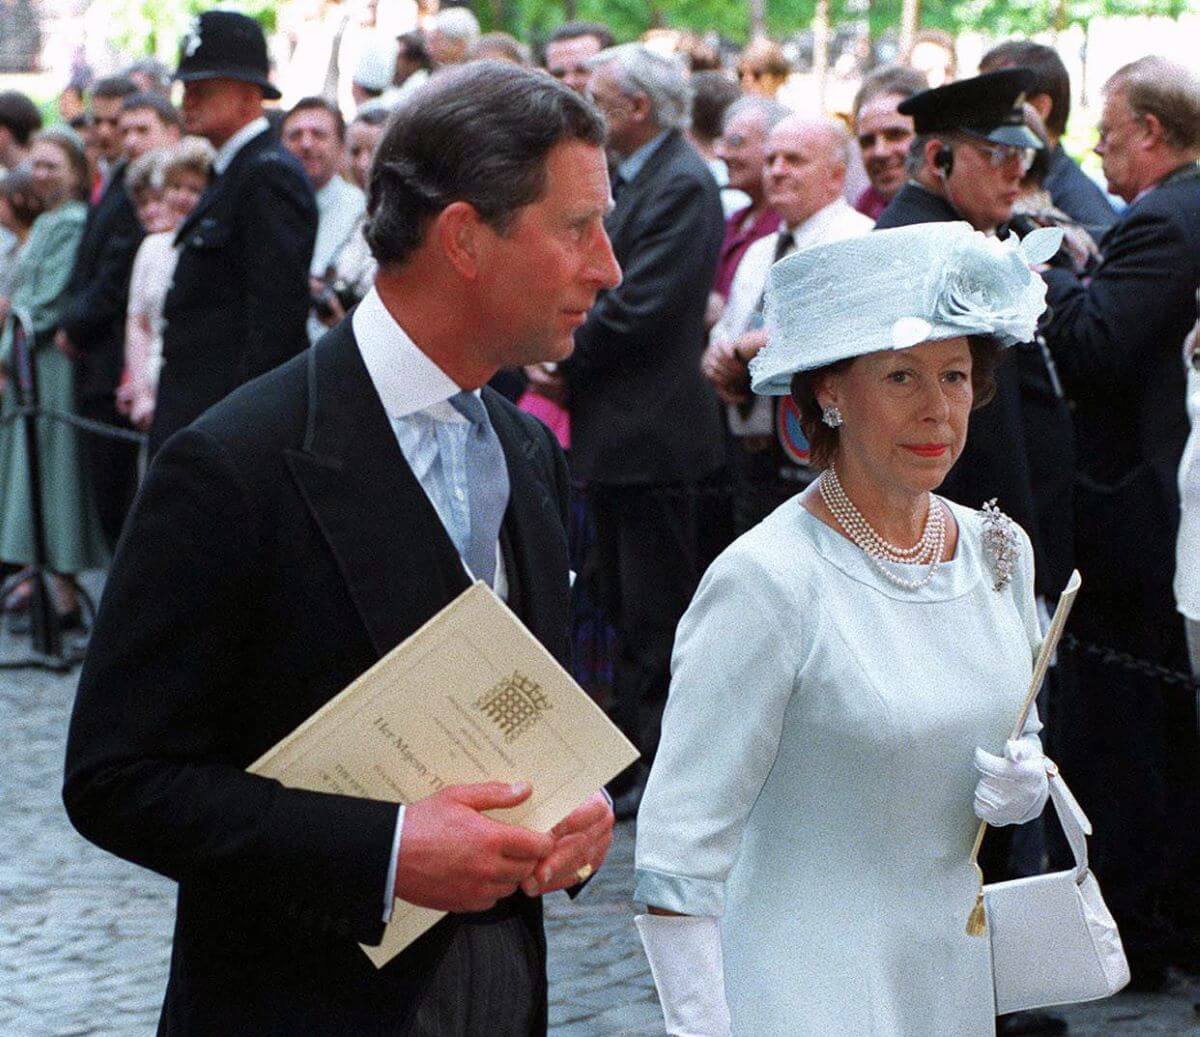 Prince Charles (now-King Charles III) and Princess Margaret, who Charles said has a "dreadful time" the last years of her life, arriving for a joint session of the Houses of Parliament